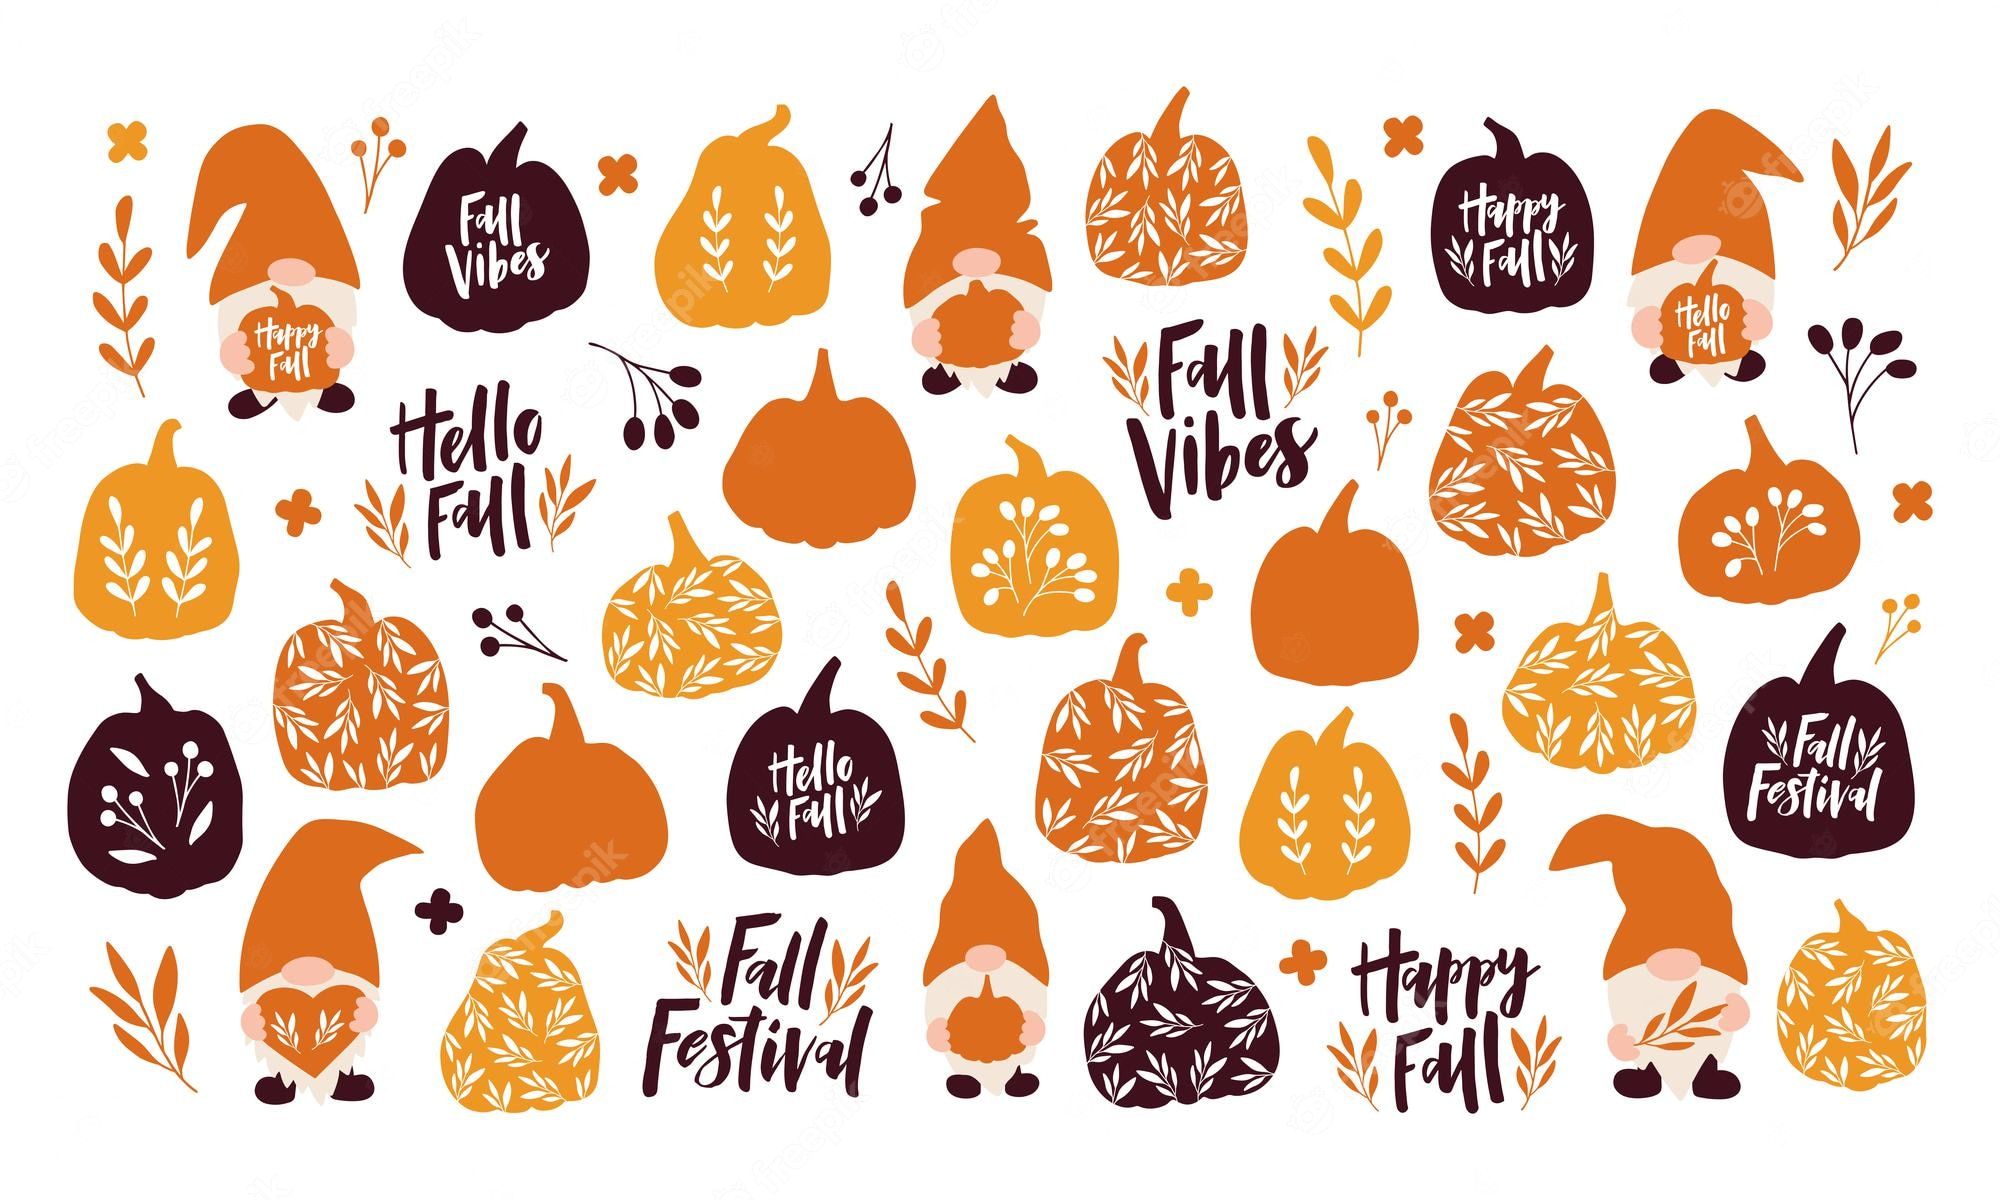 A collection of fall themed designs including pumpkins, gnomes, and leaves. - Cute fall